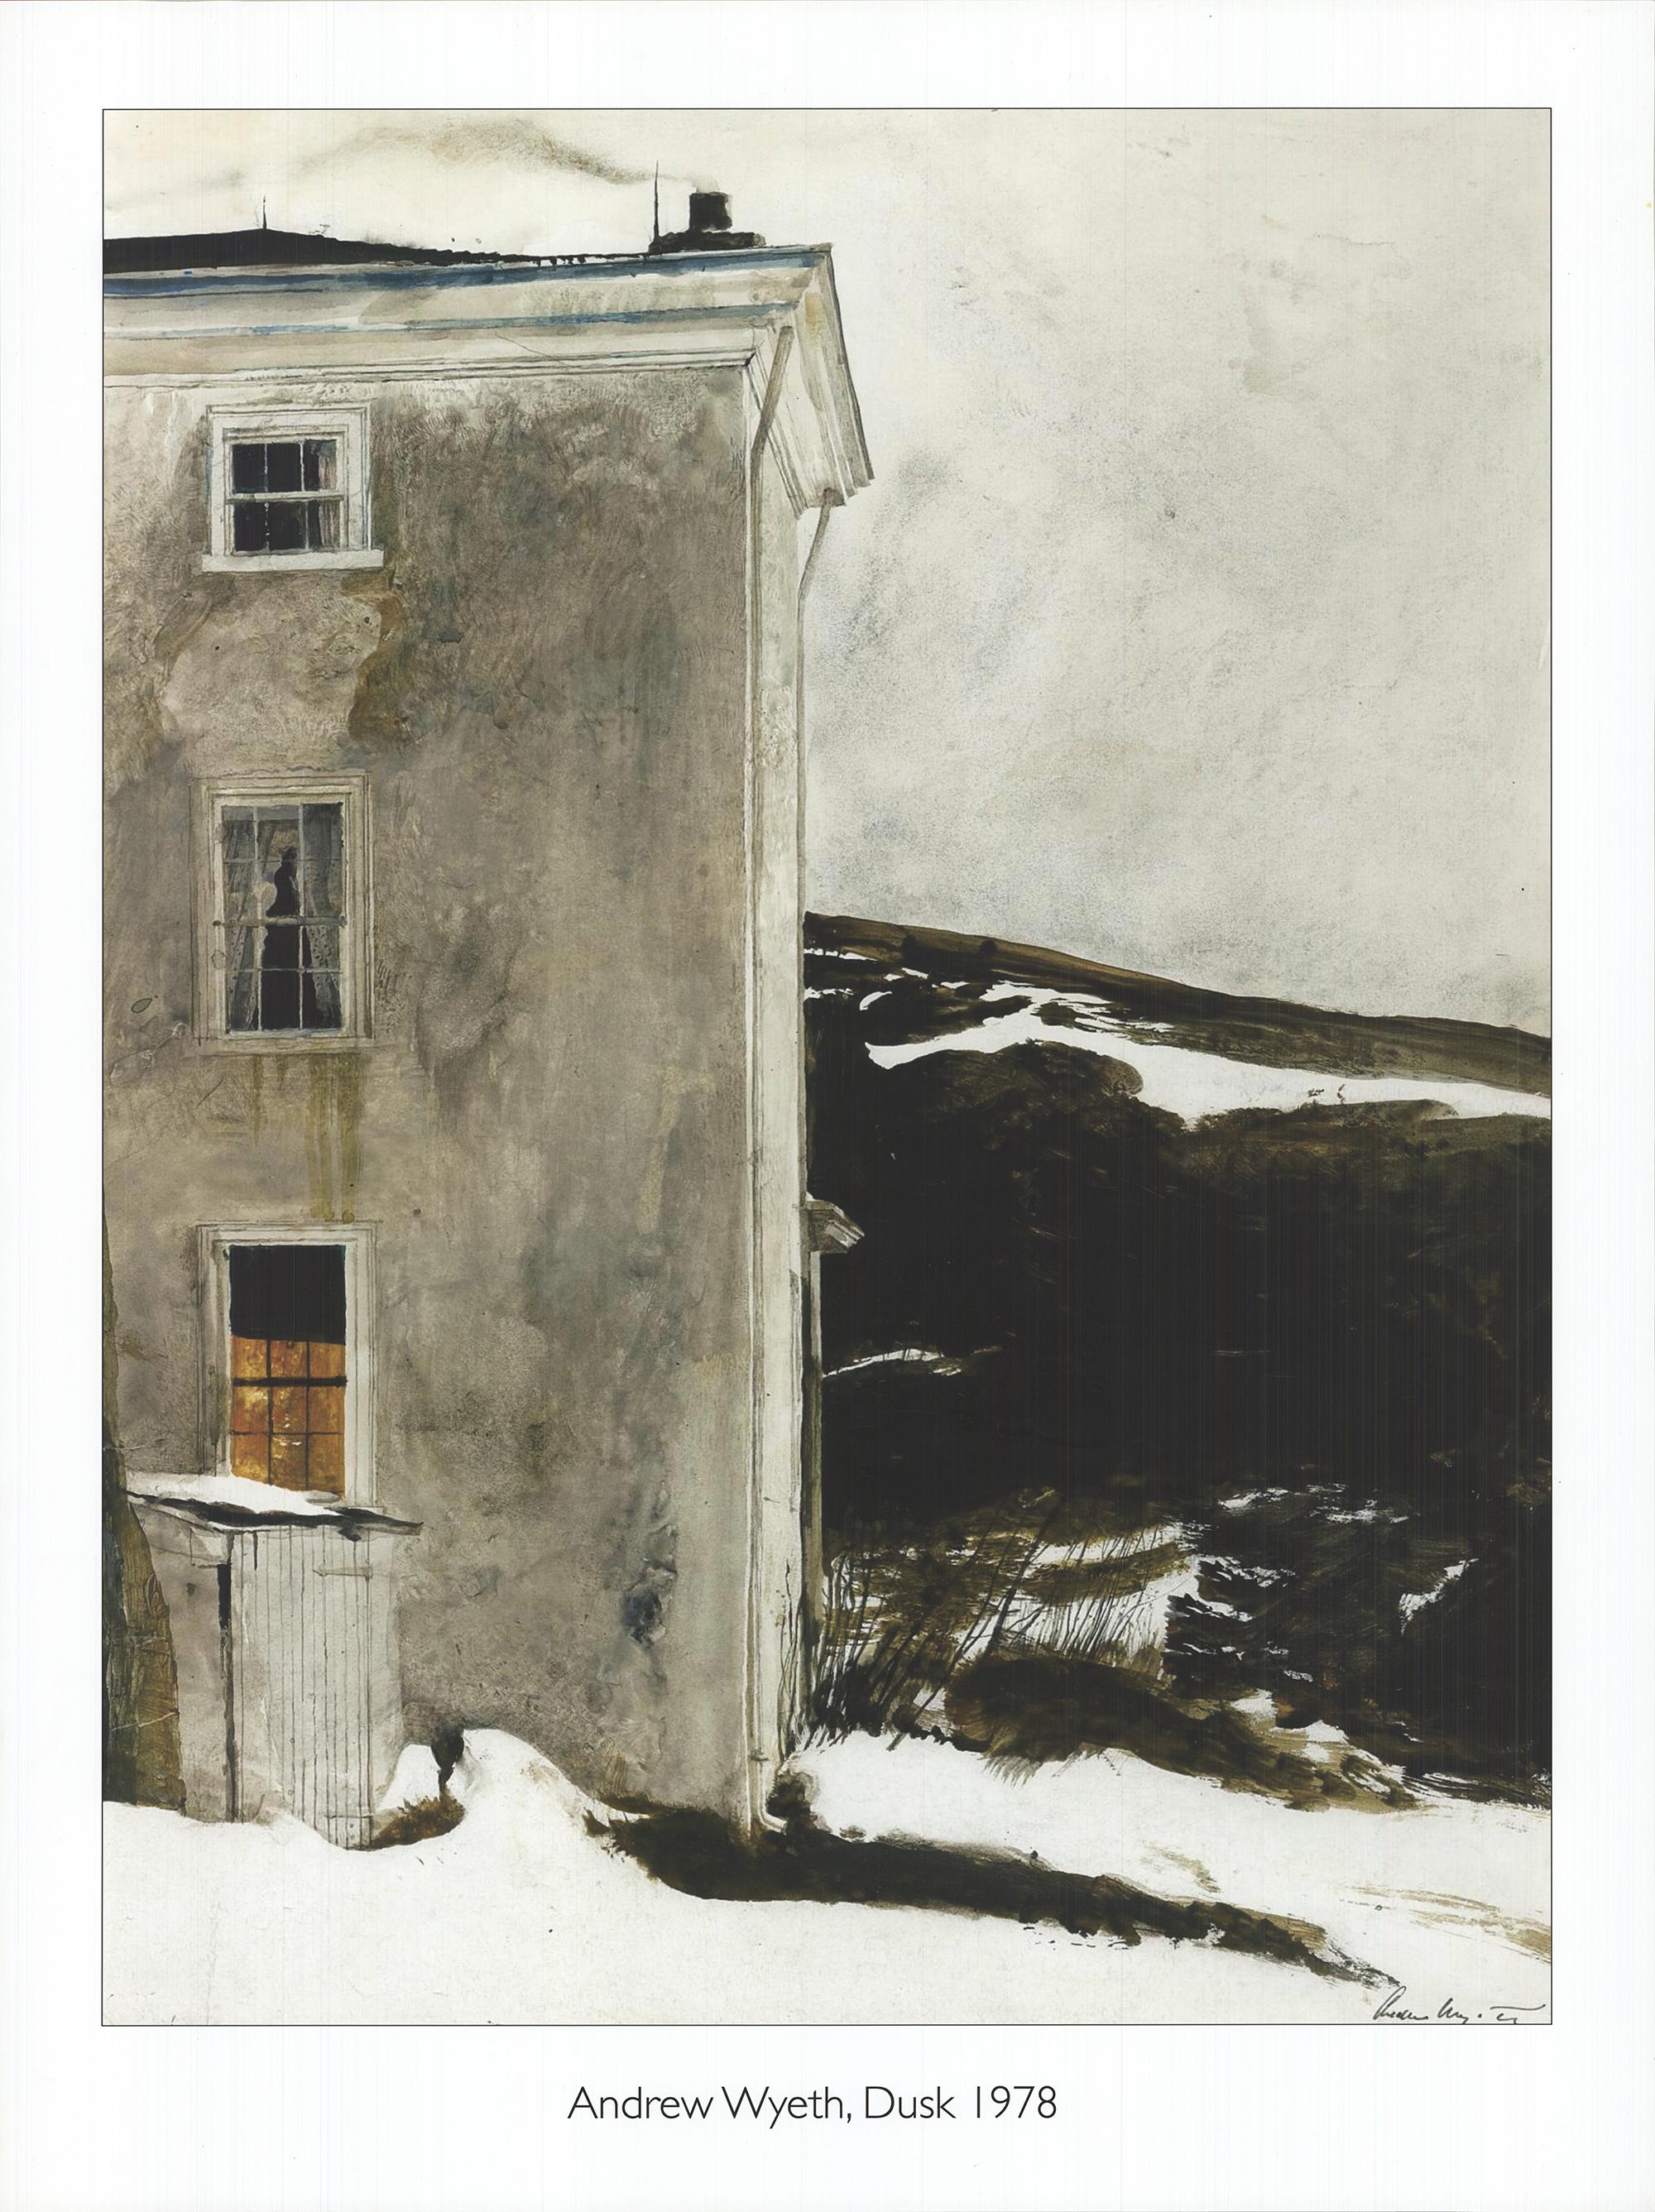 ANDREW WYETH Dusk 31.75" x 23.75" Offset Lithograph Contemporary Black & White - Print by Andrew Wyeth